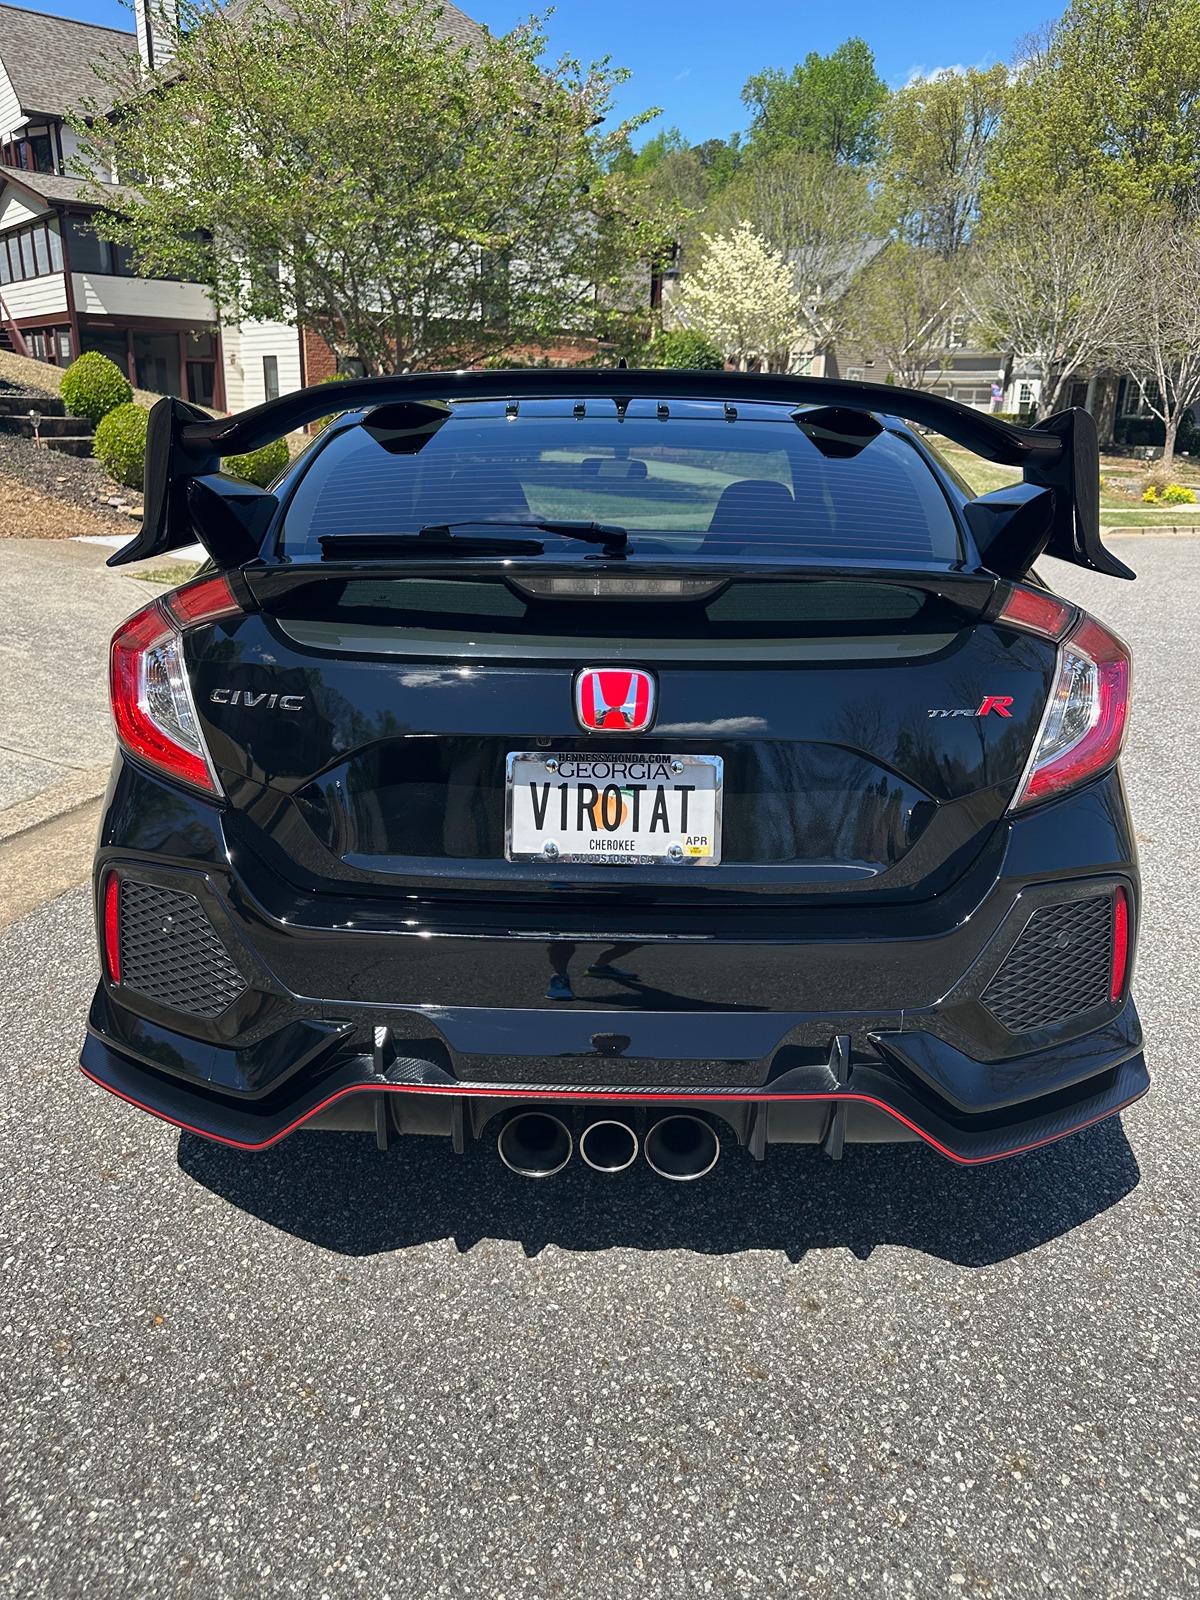 Honda Civic 10th gen Sold. 2019 Civic Type R for sale IMG_8137